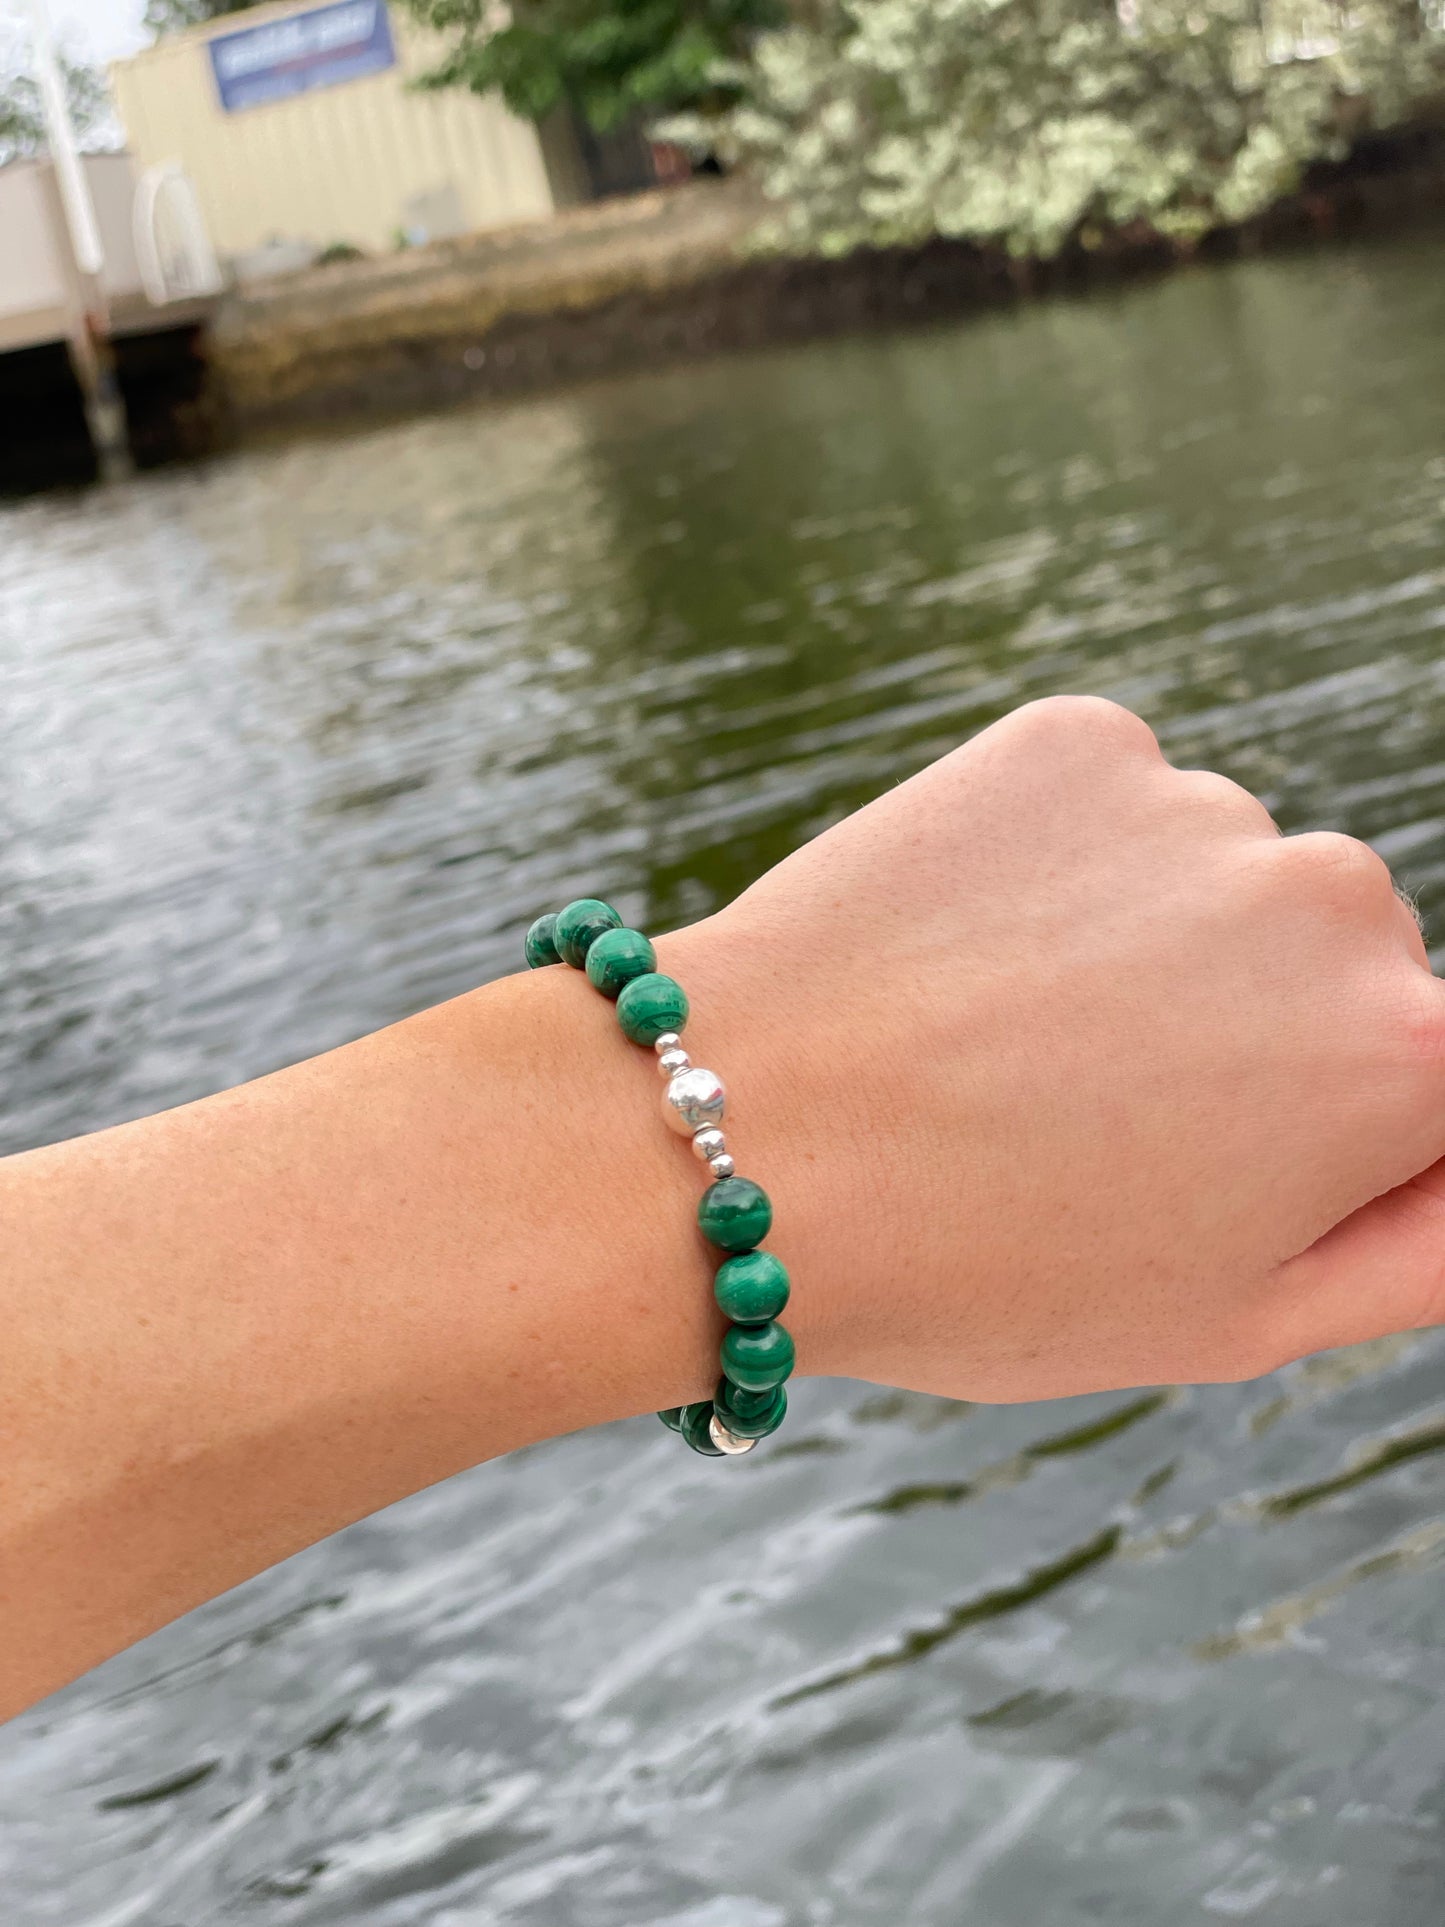 Limited Edition Katrella Malachite Bracelet With Sterling Silver Findings